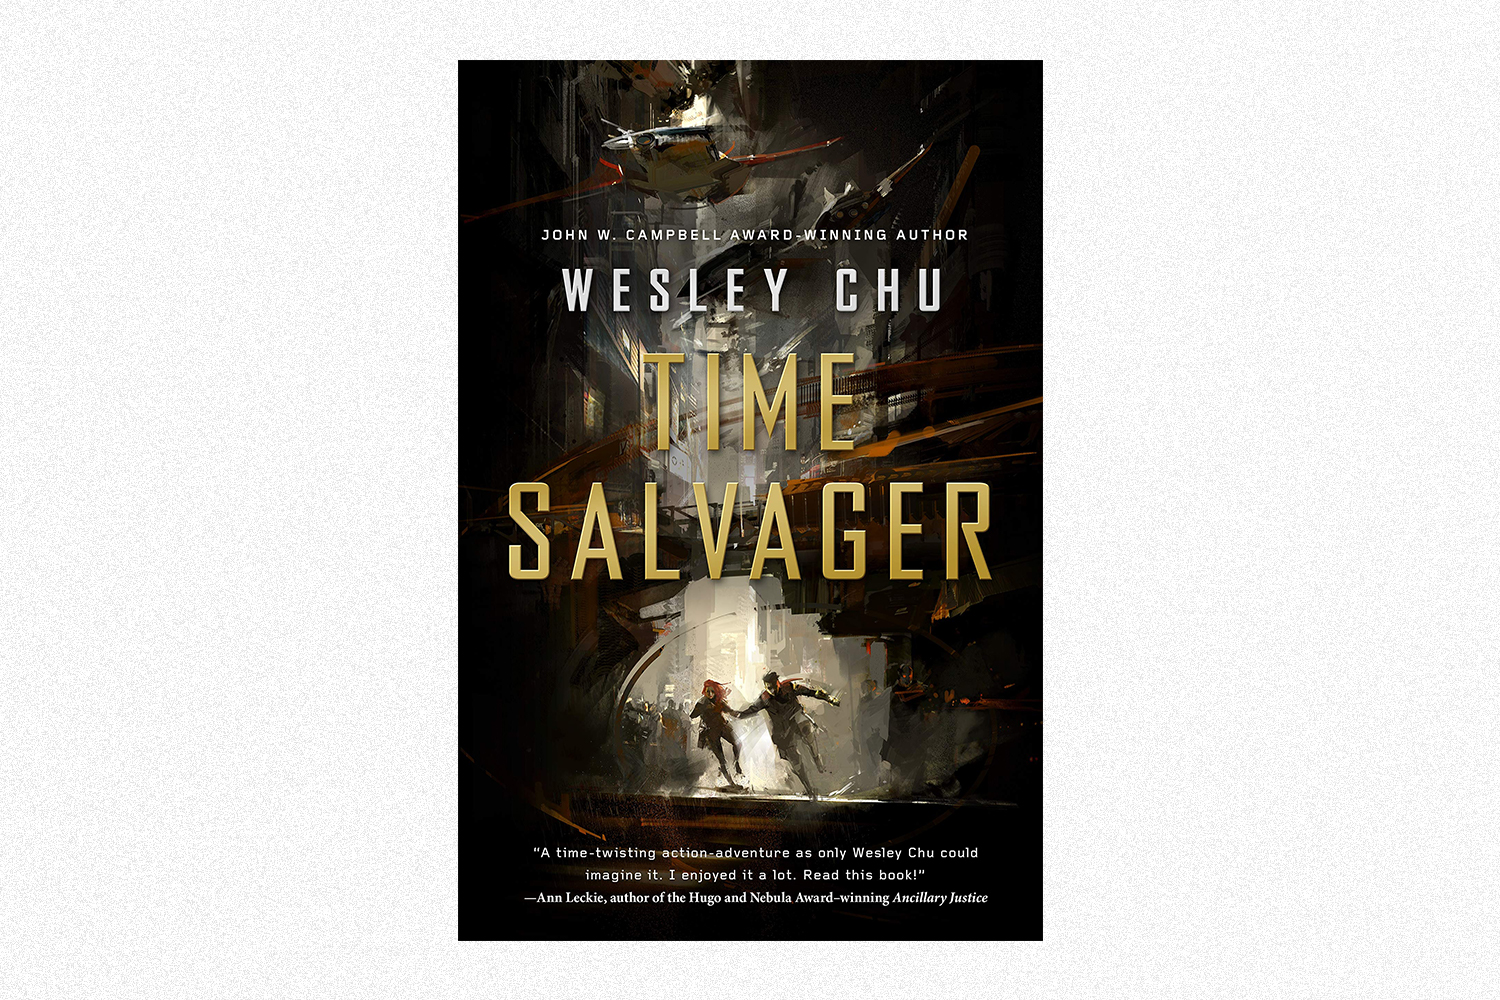 The book cover for Time Salvager by Wesley Chu